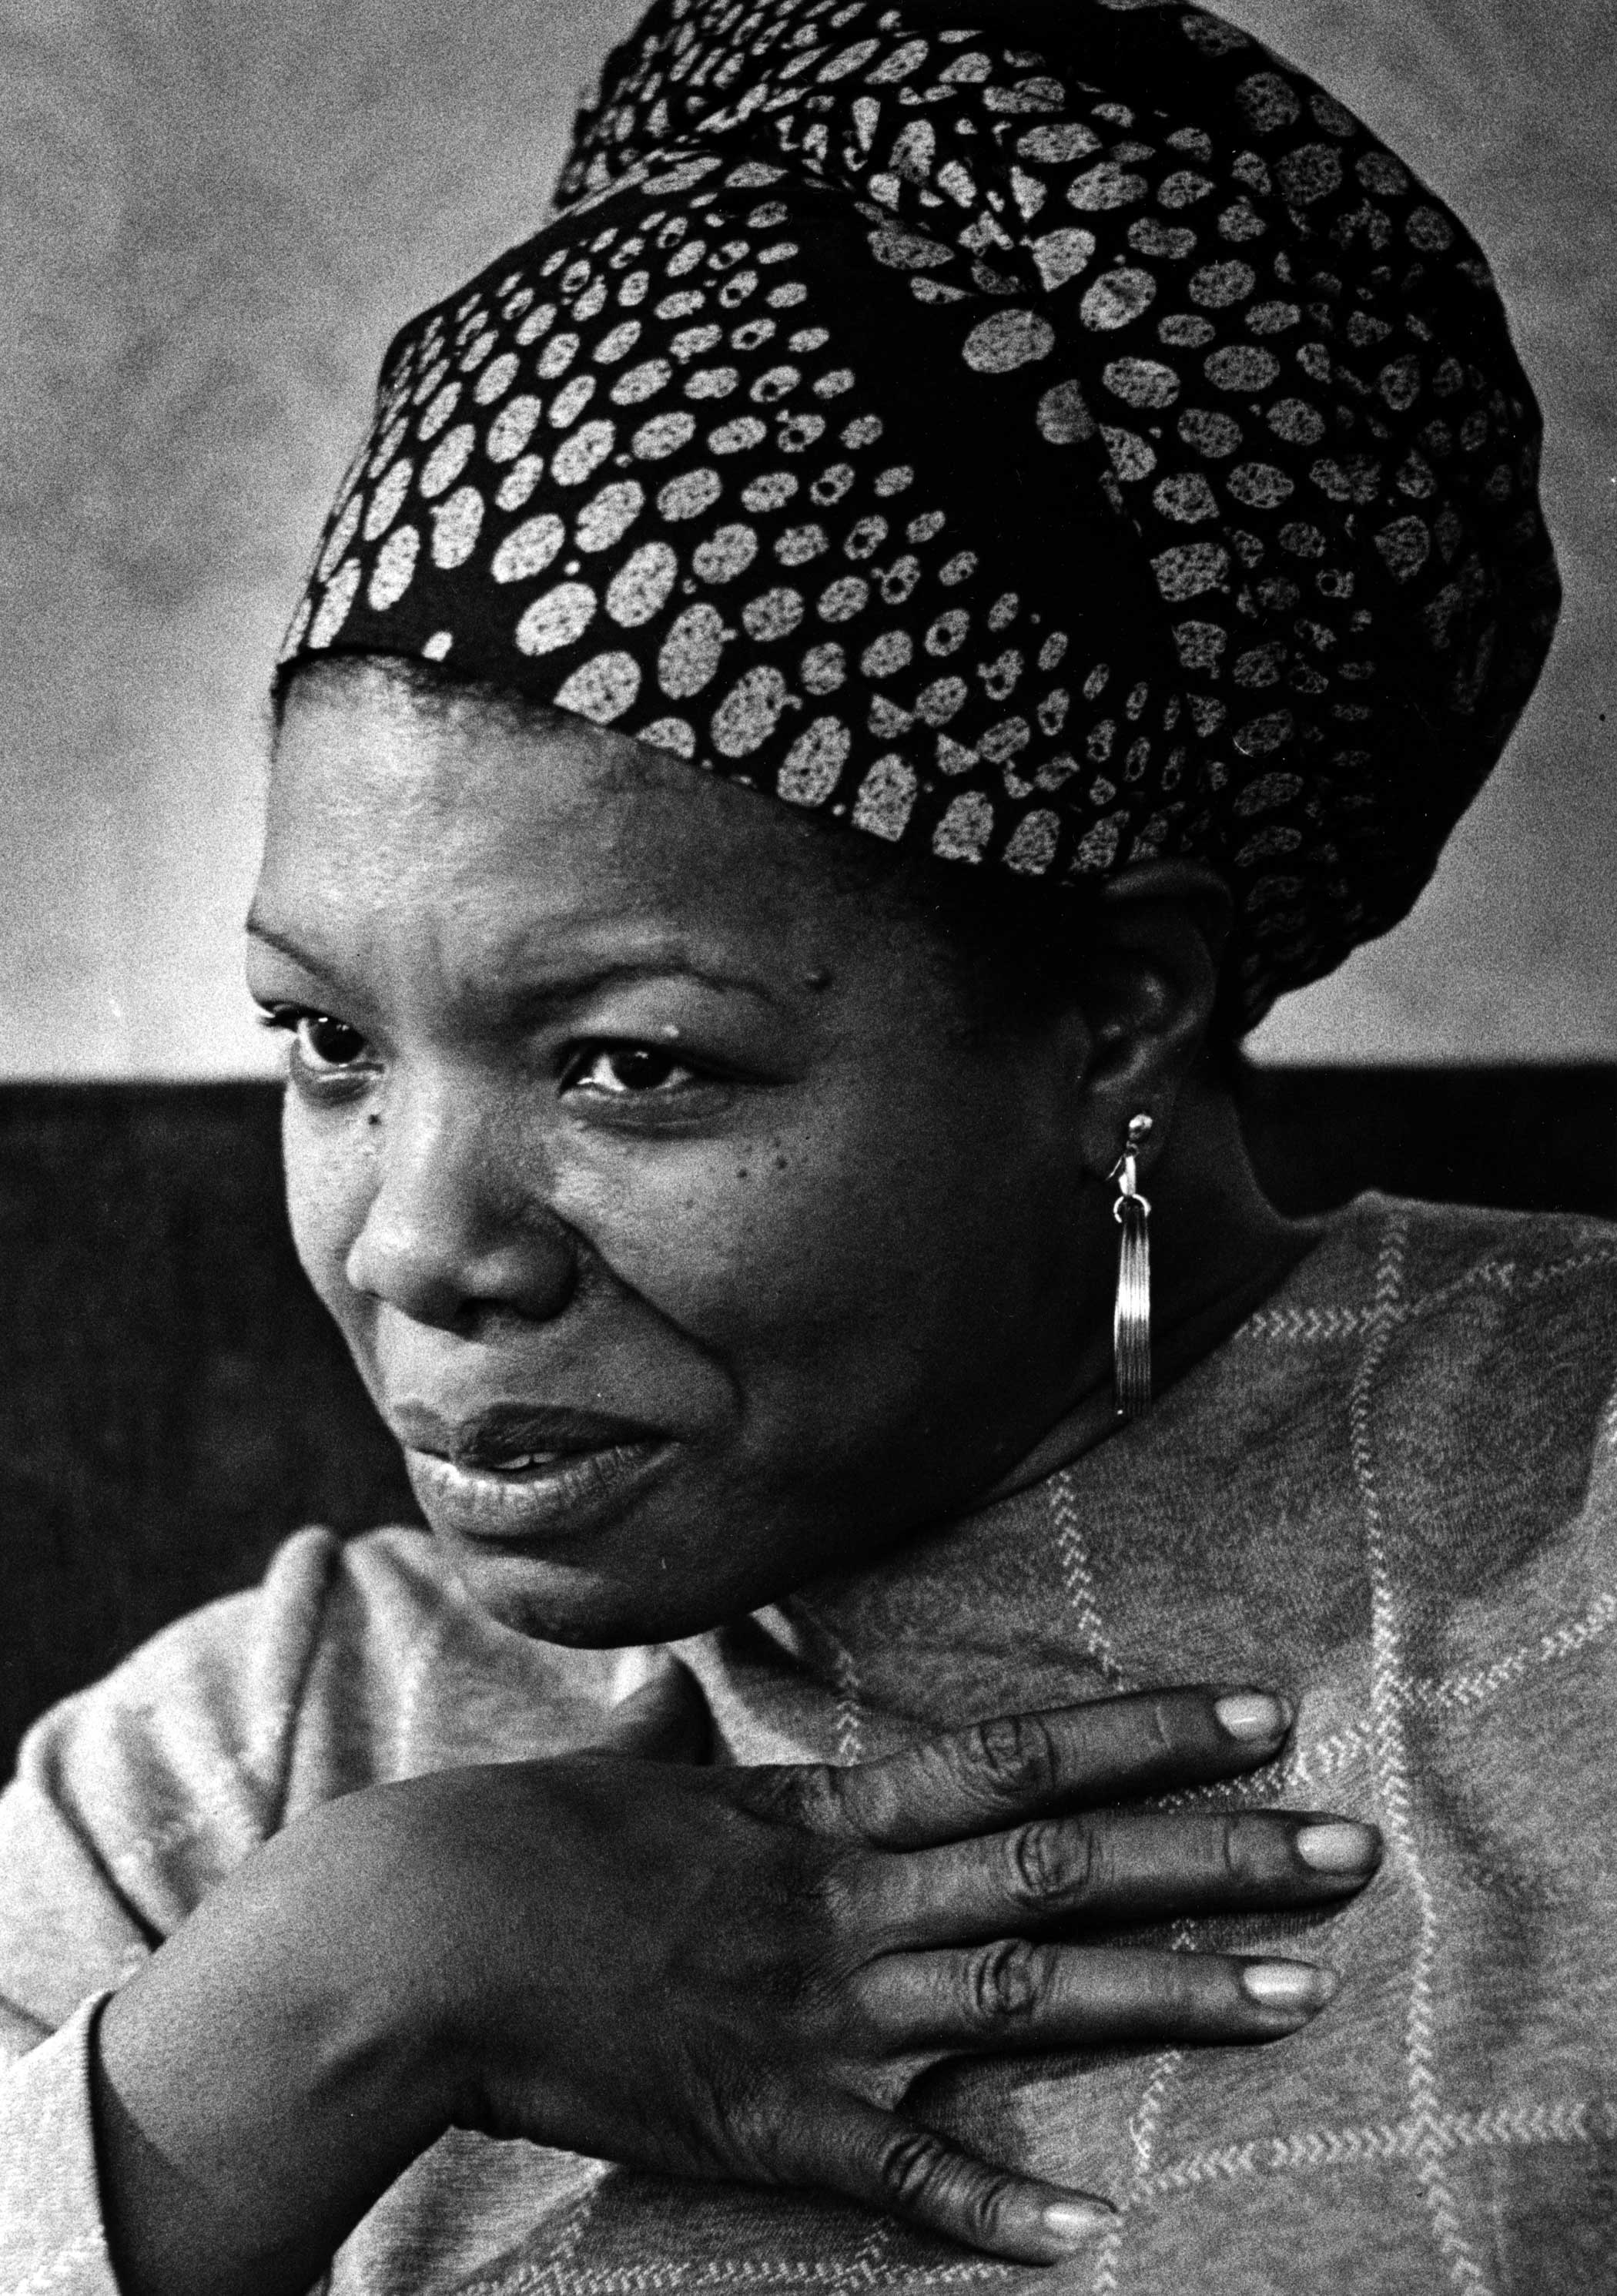 Maya Angelou during an interview in Washington, D.C. on June 3, 1974.